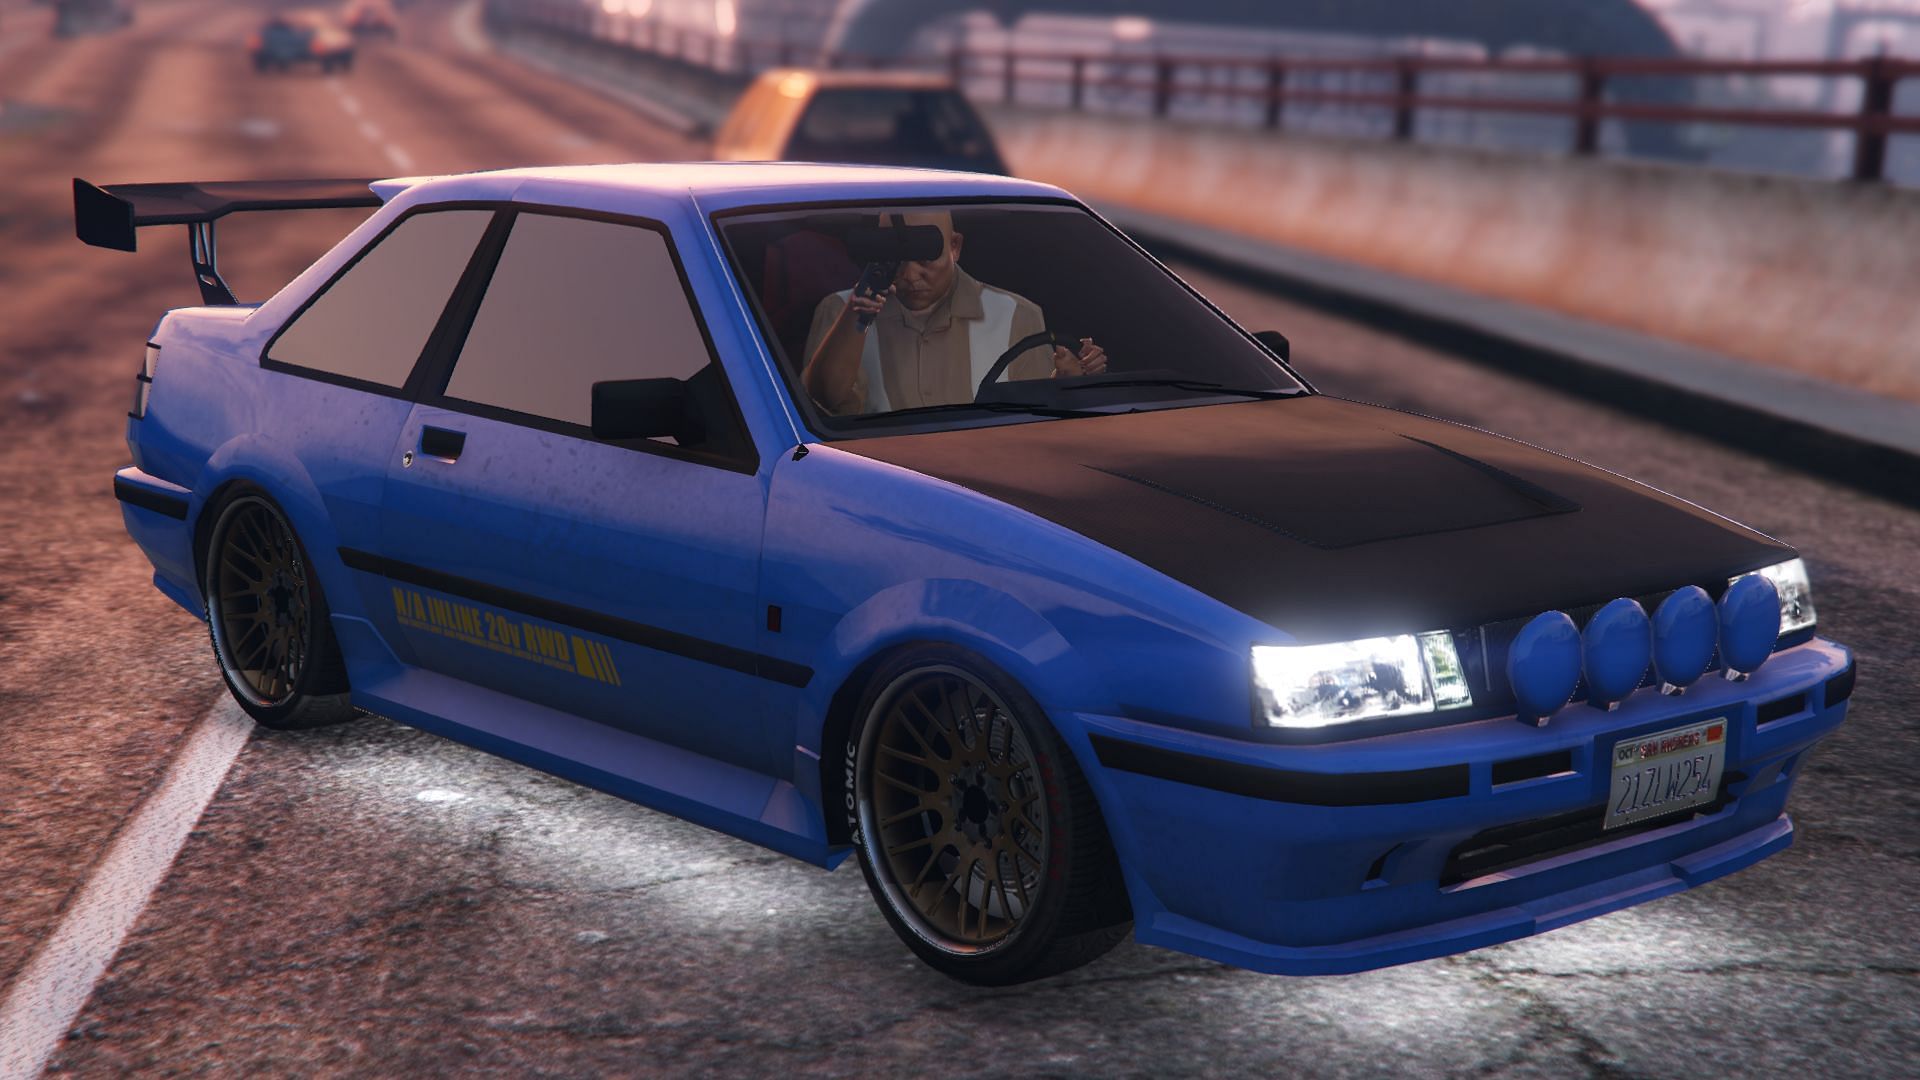 A modified Futo, which is a vehicle you can normally get for free in GTA Online